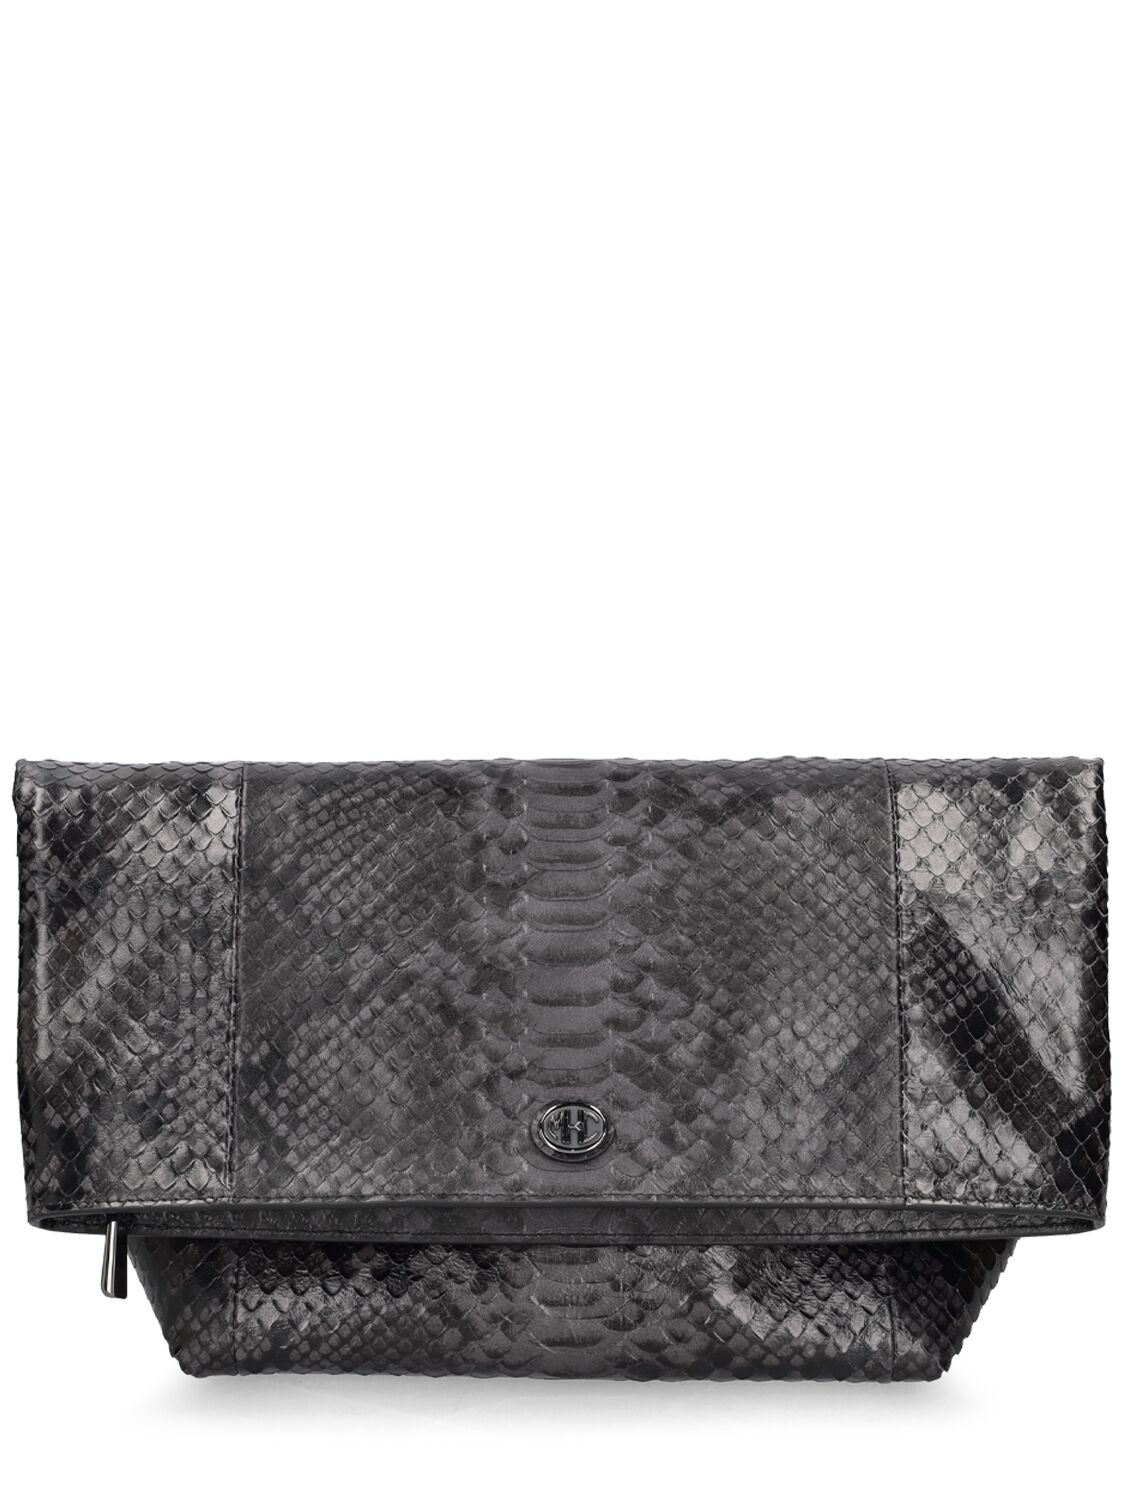 Michael Kors Candice Printed Leather Soft Clutch In Phyton